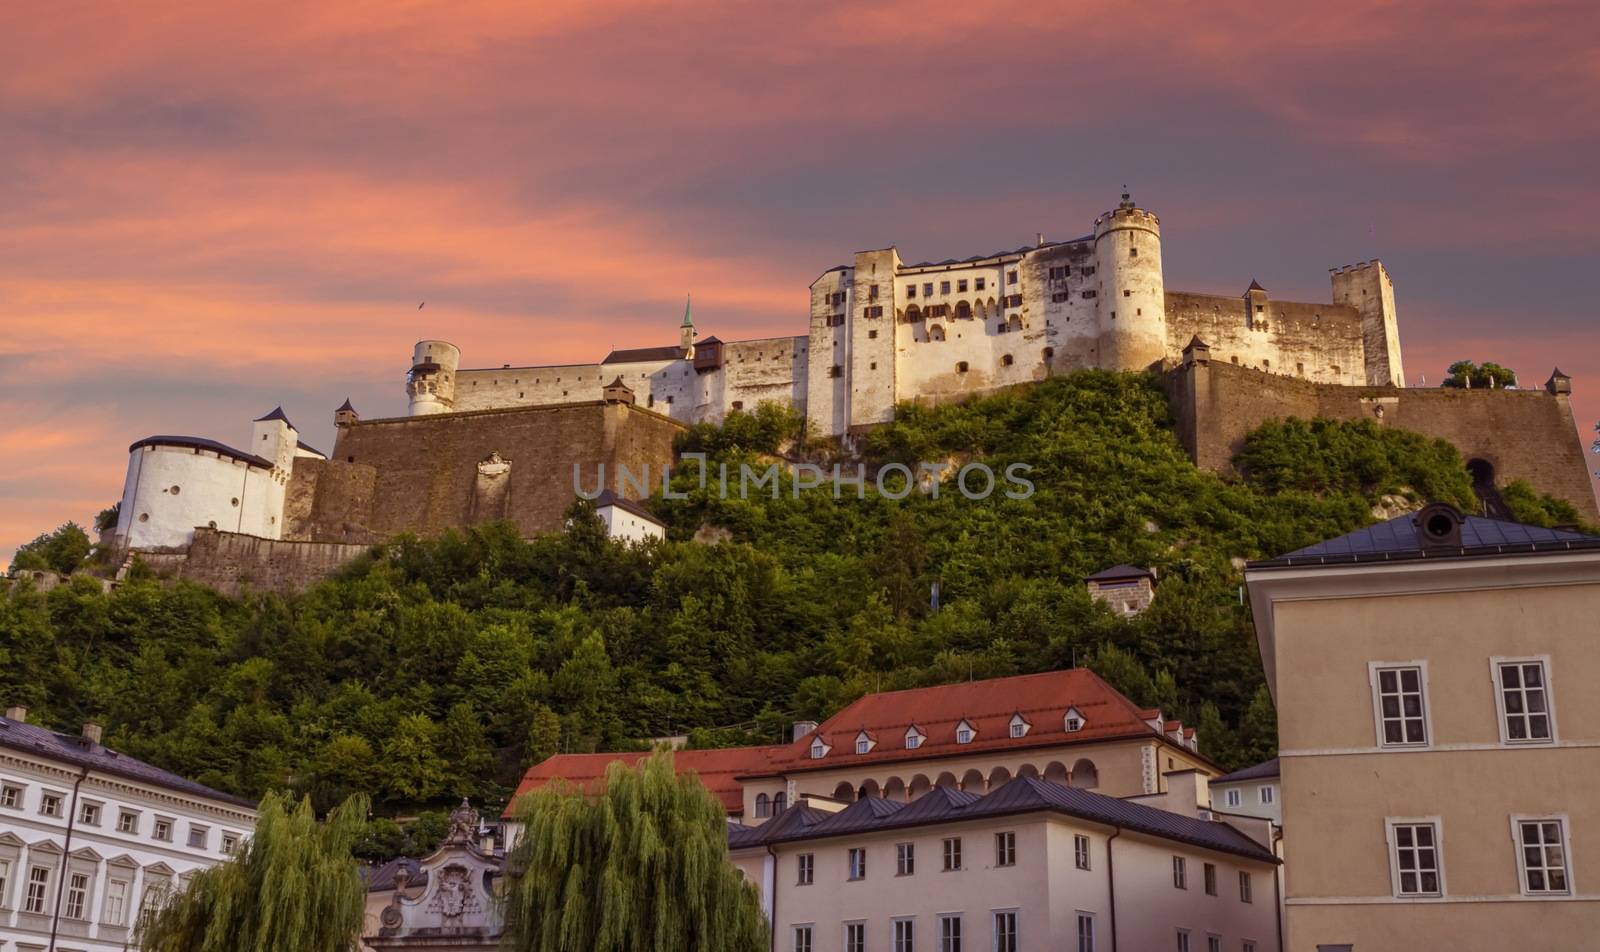 Famous Hohensalzburg Fortress on a hill in Salzburg by day, Austria